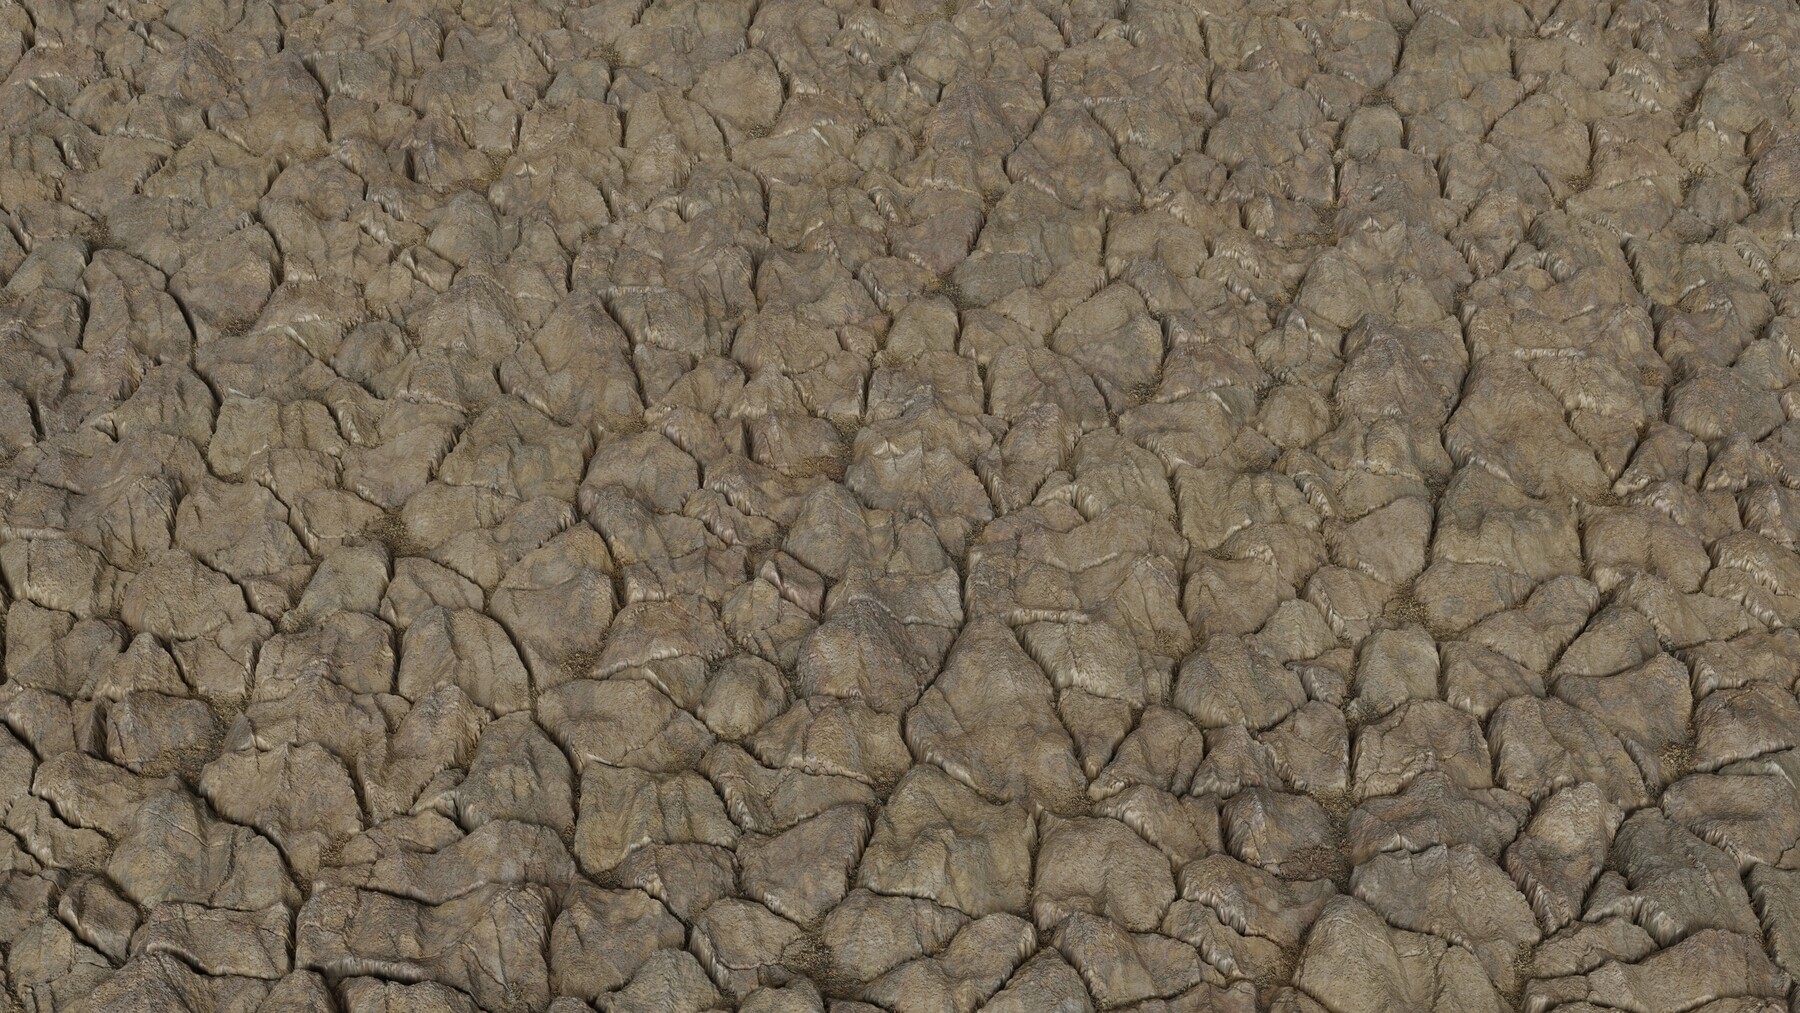 Cracked Red Clay Ground with Water PBR Texture